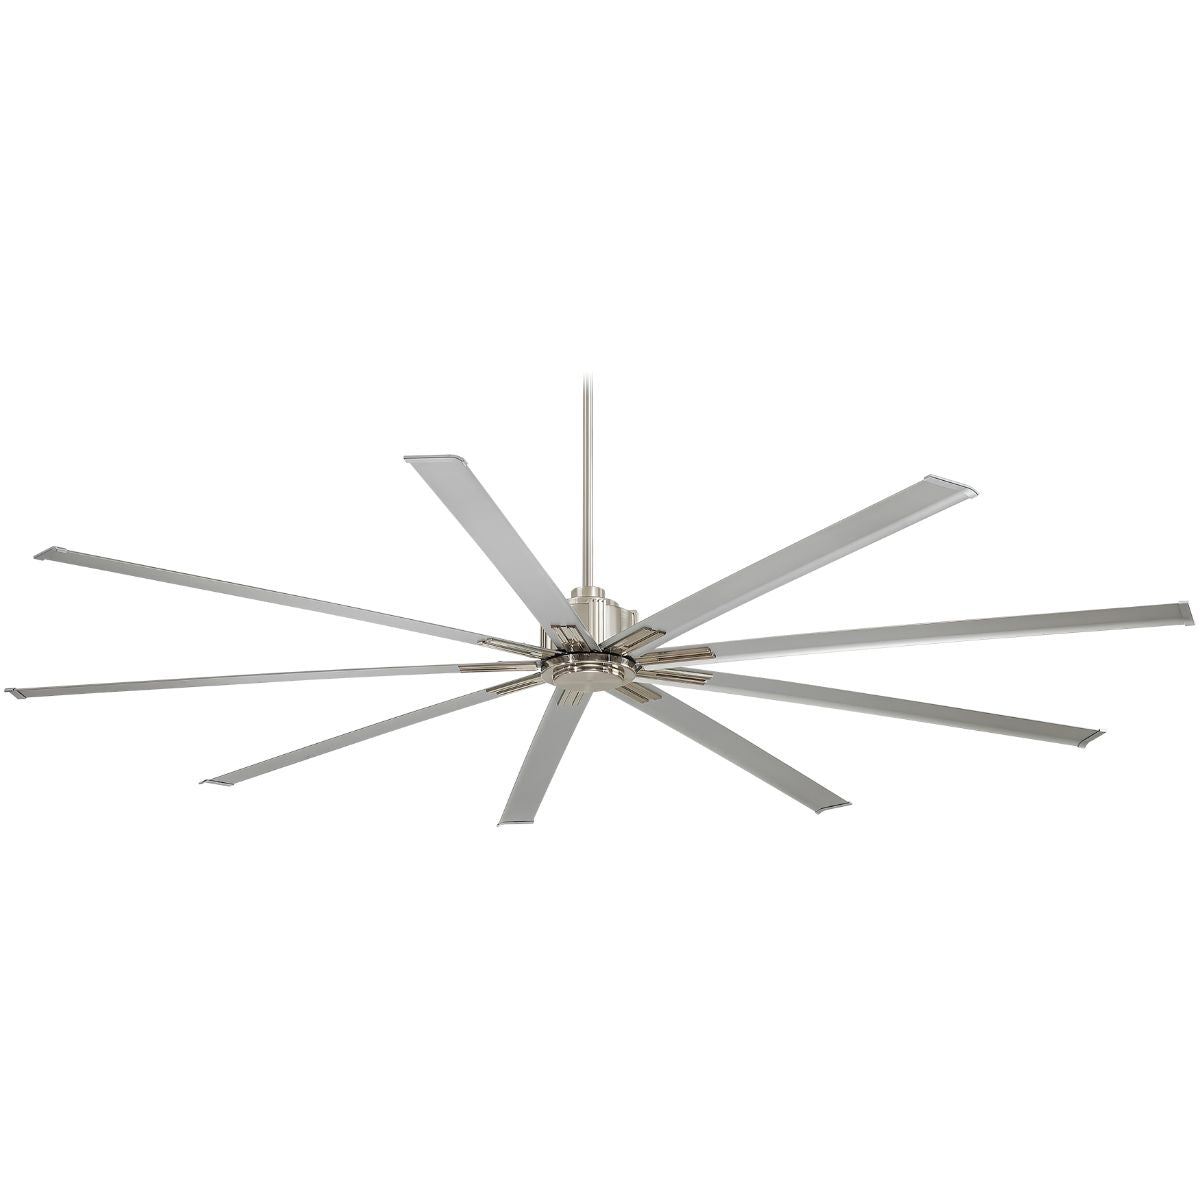 Xtreme 96 Inch Windmill Ceiling Fan With Remote